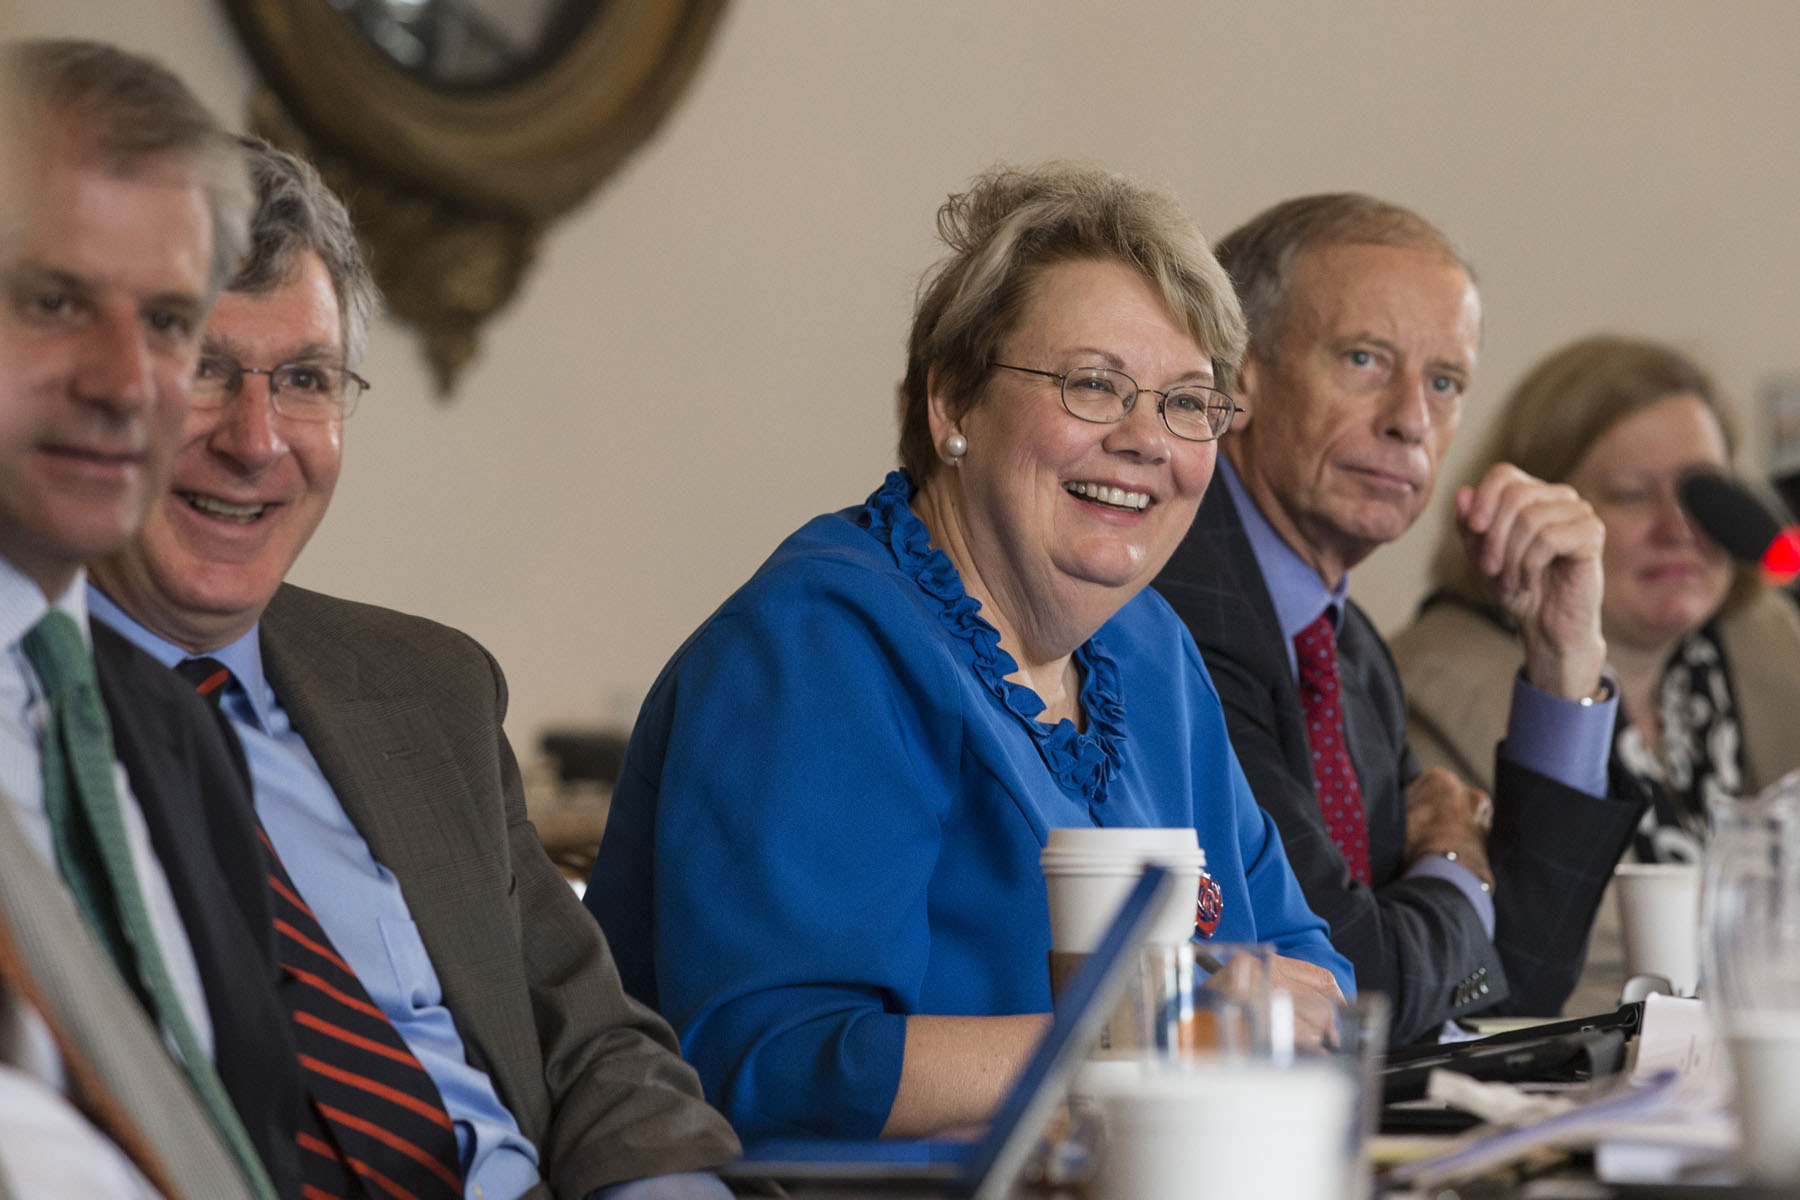 U.Va. President Teresa A. Sullivan sitting at a table with others listening to a speaker